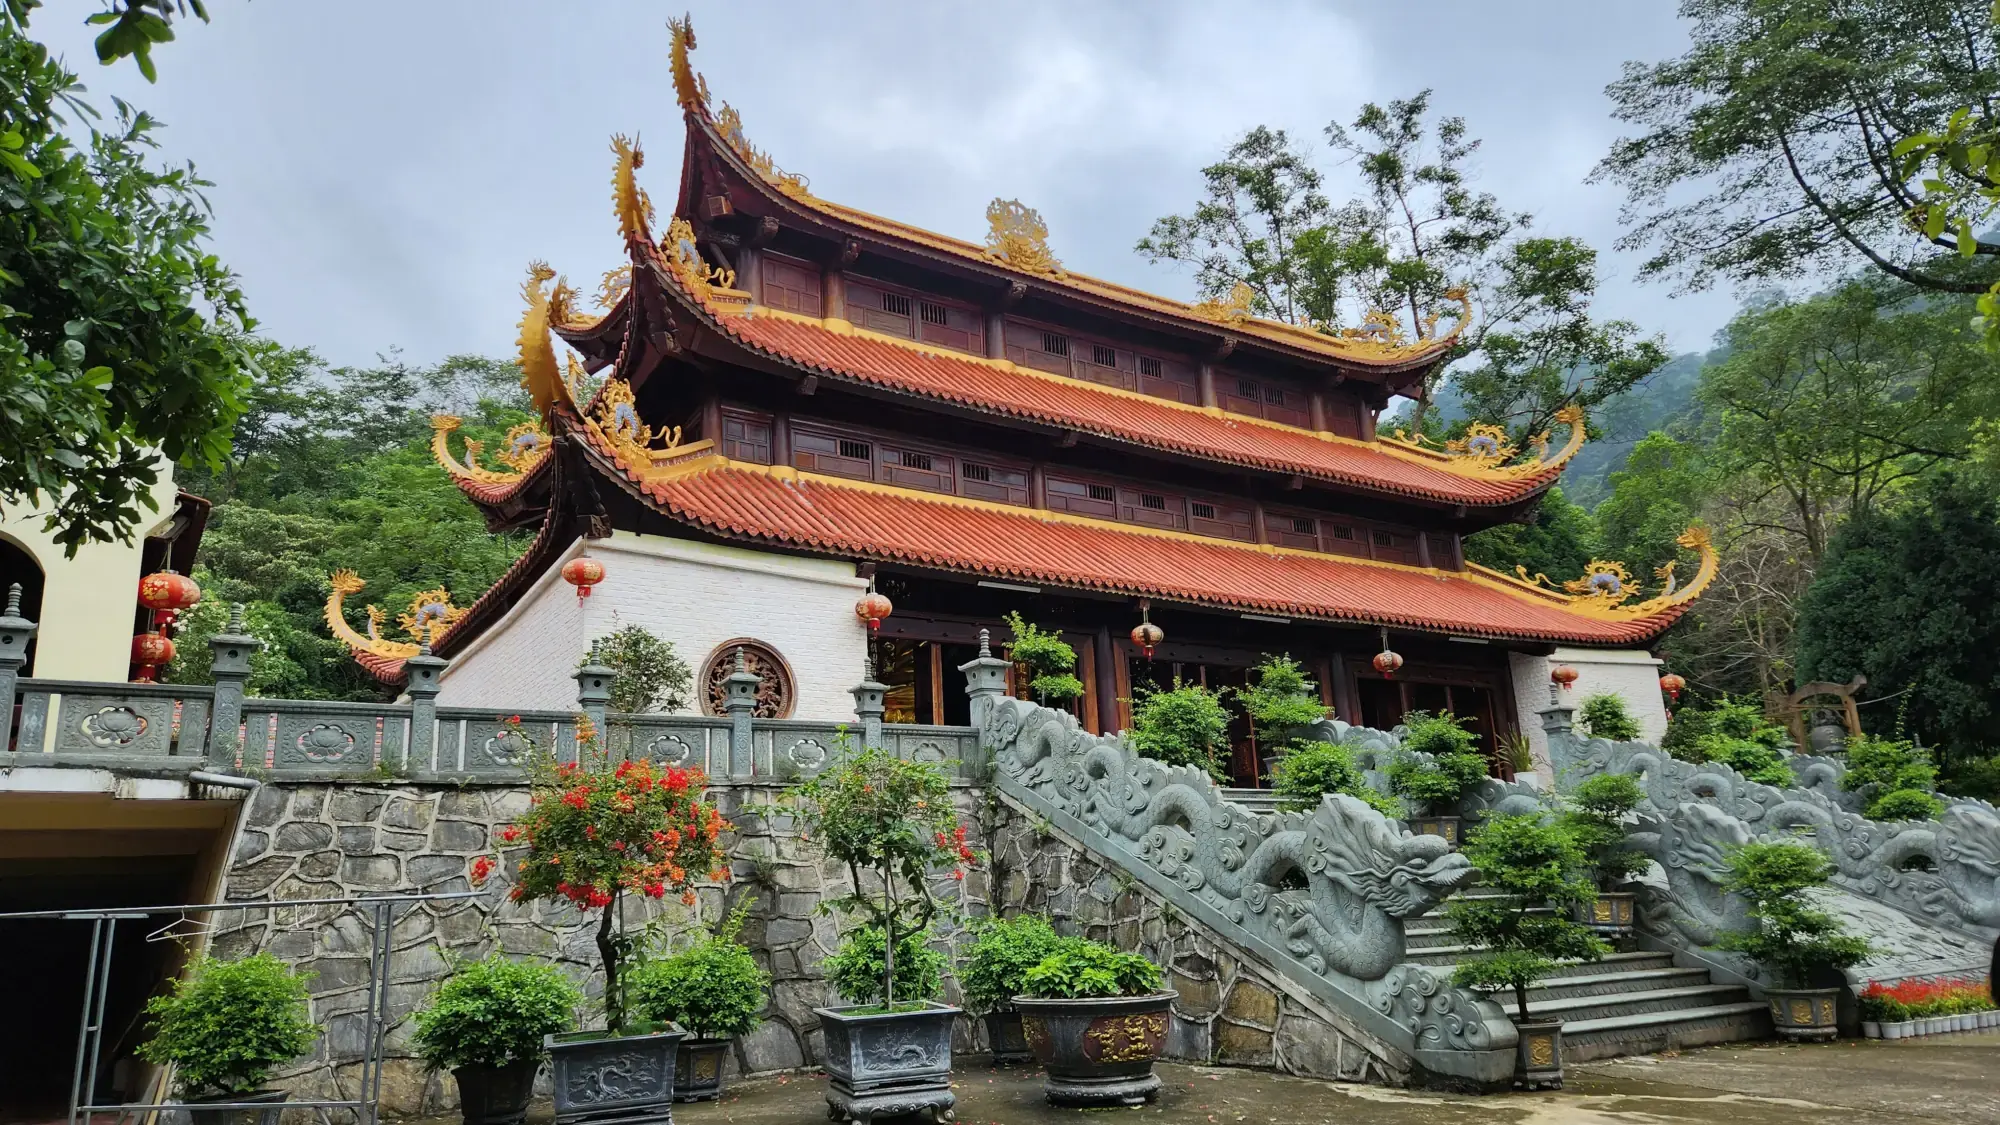 Tan Vien Pagoda - temple on the hill